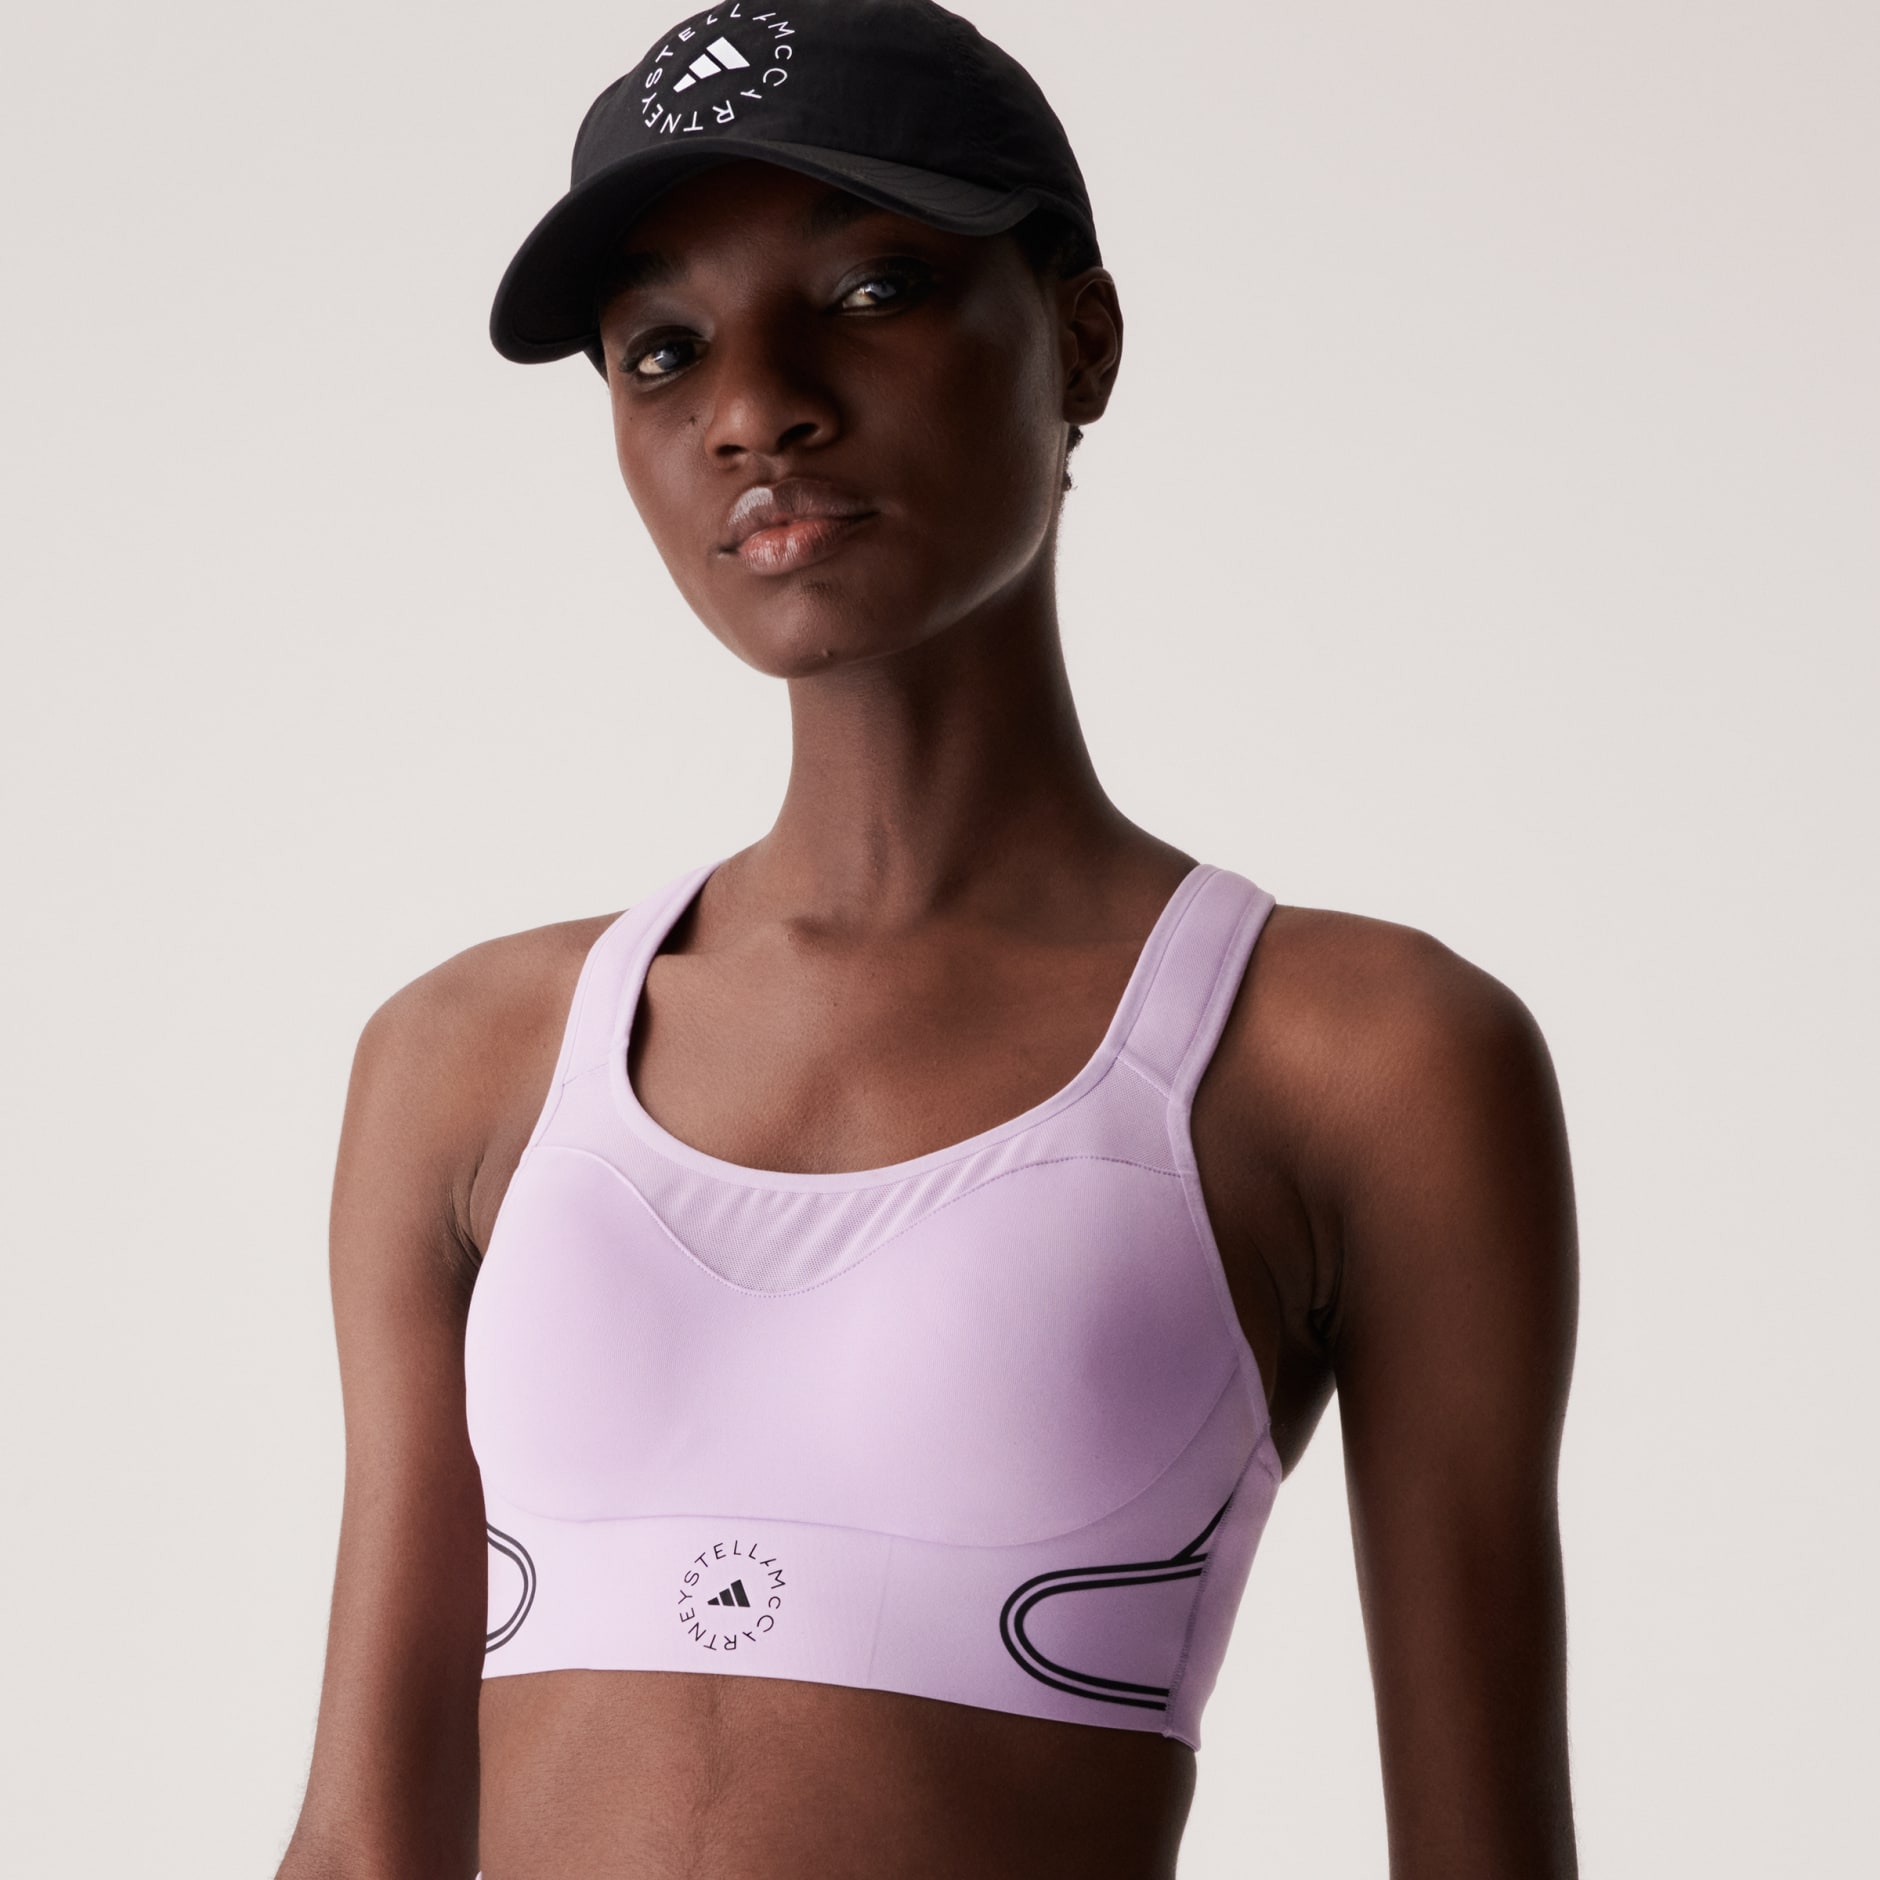 Adidas Women's Crop Top Size XL (A-C Cup)(s)